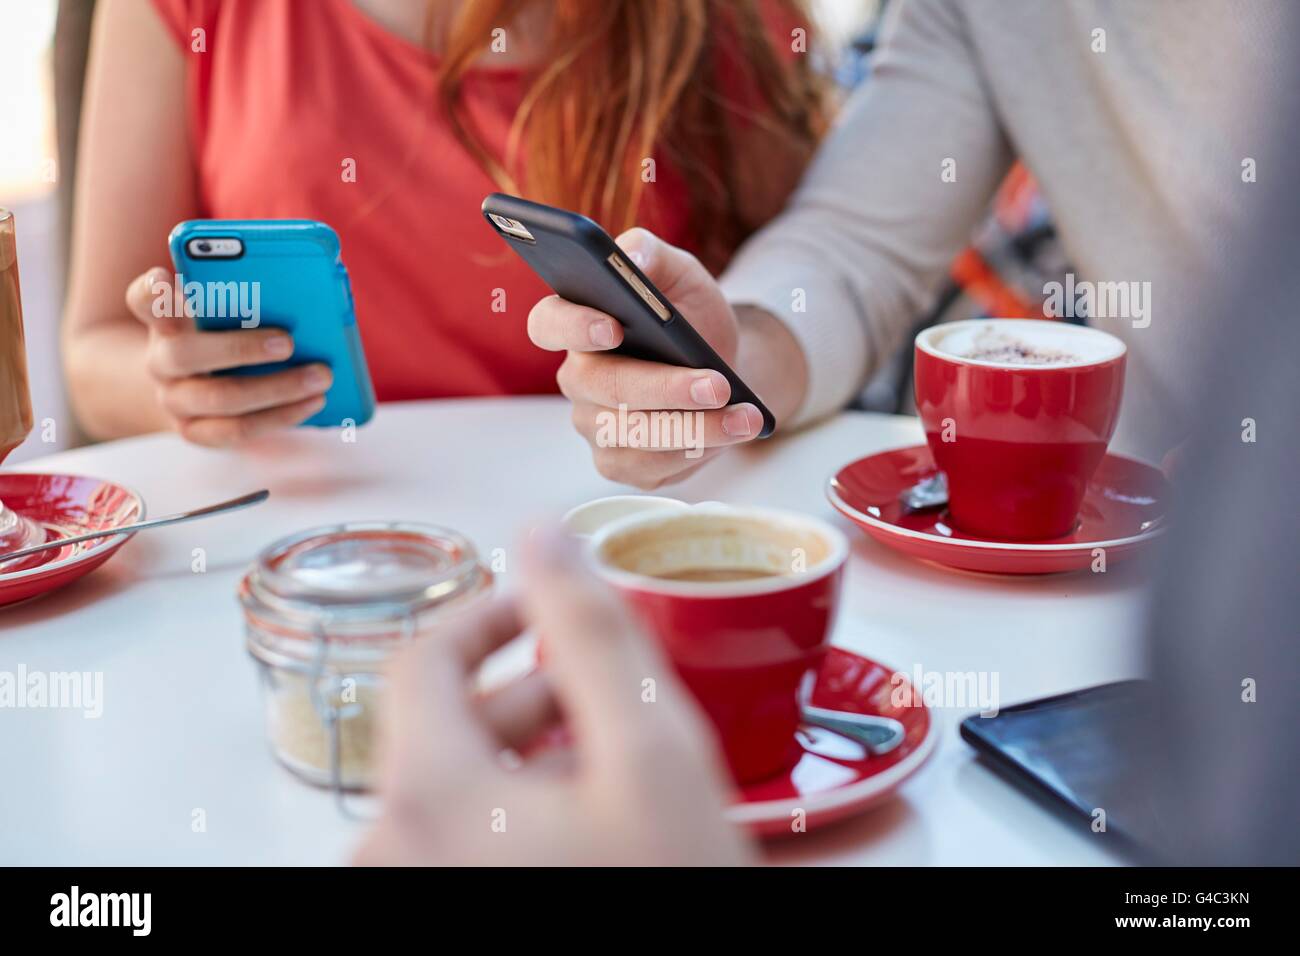 MODEL RELEASED. Young people in cafe using smartphones. Stock Photo